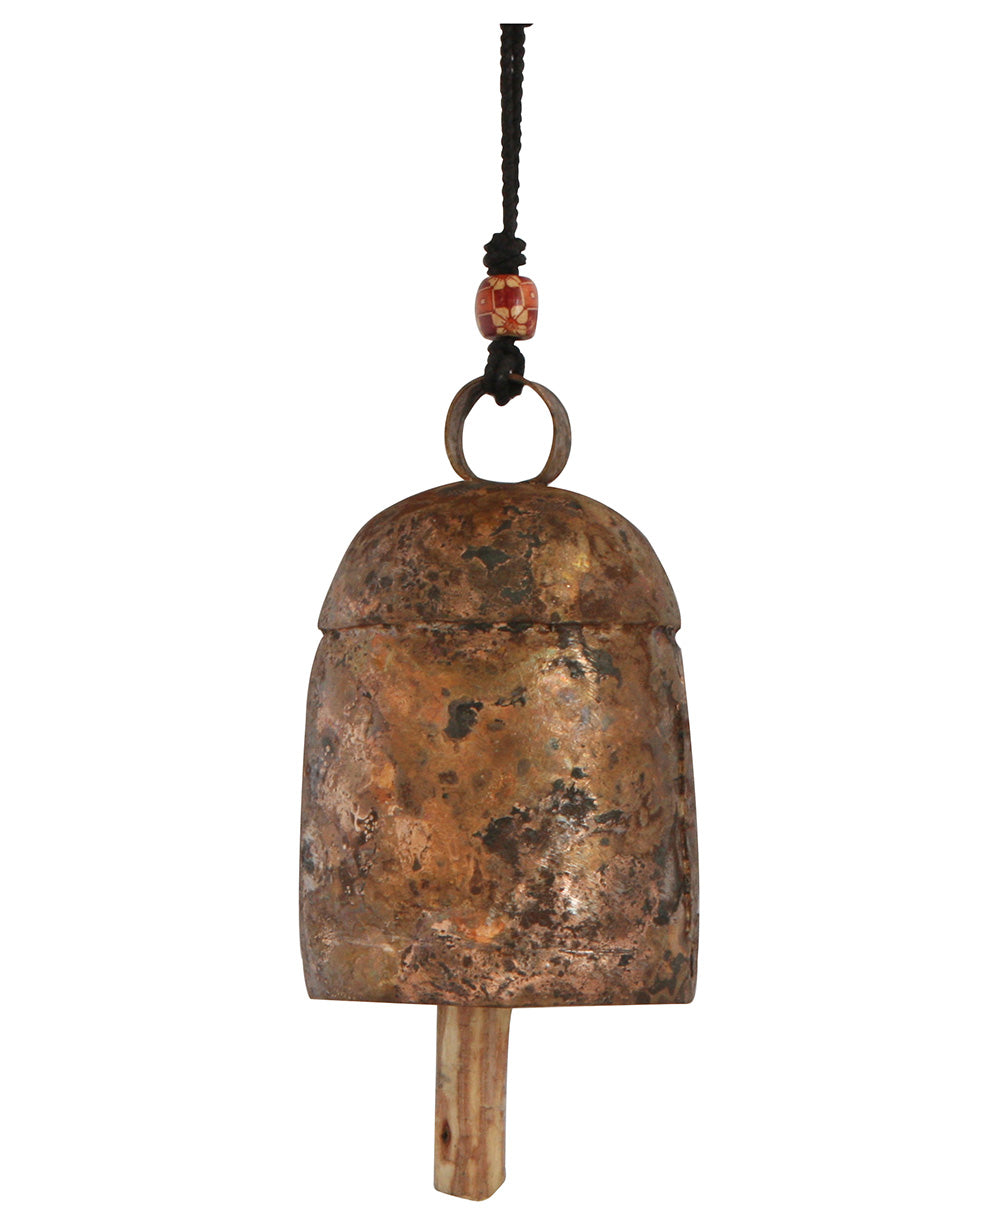 Stunning mini cow bells for Decor and Souvenirs 